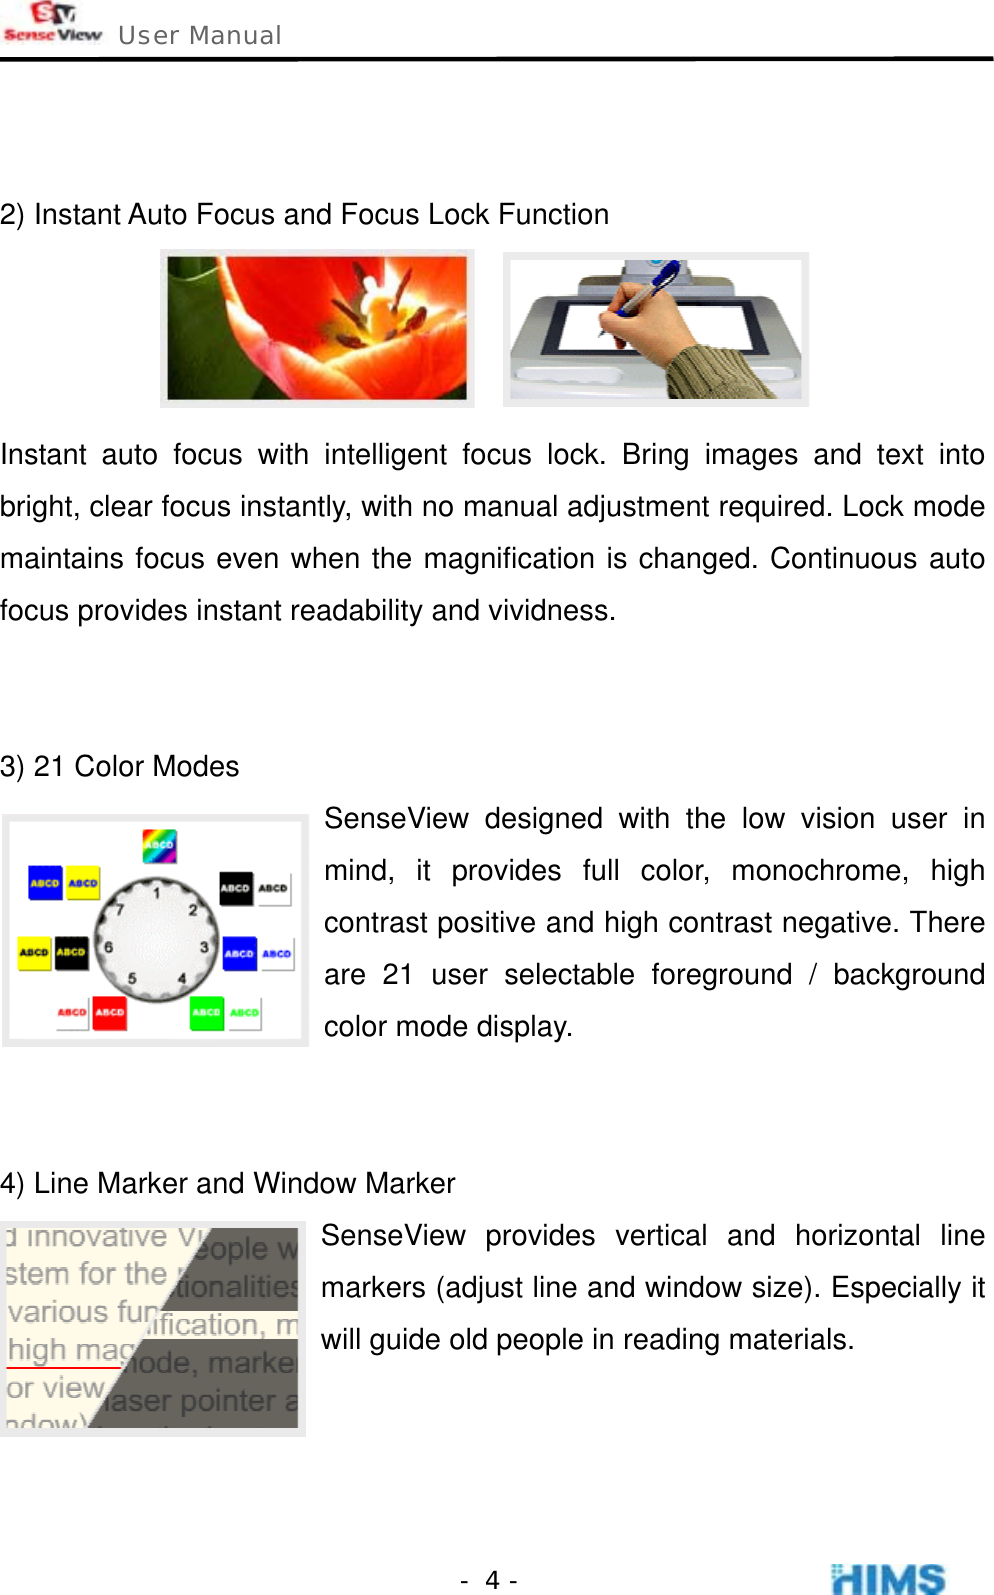  User Manual    - 4 -  2) Instant Auto Focus and Focus Lock Function  Instant auto focus with intelligent focus lock. Bring images and text into bright, clear focus instantly, with no manual adjustment required. Lock mode maintains focus even when the magnification is changed. Continuous auto focus provides instant readability and vividness.   3) 21 Color Modes SenseView designed with the low vision user in mind, it provides full color, monochrome, high contrast positive and high contrast negative. There are 21 user selectable foreground / background color mode display.   4) Line Marker and Window Marker SenseView provides vertical and horizontal line markers (adjust line and window size). Especially it will guide old people in reading materials.    